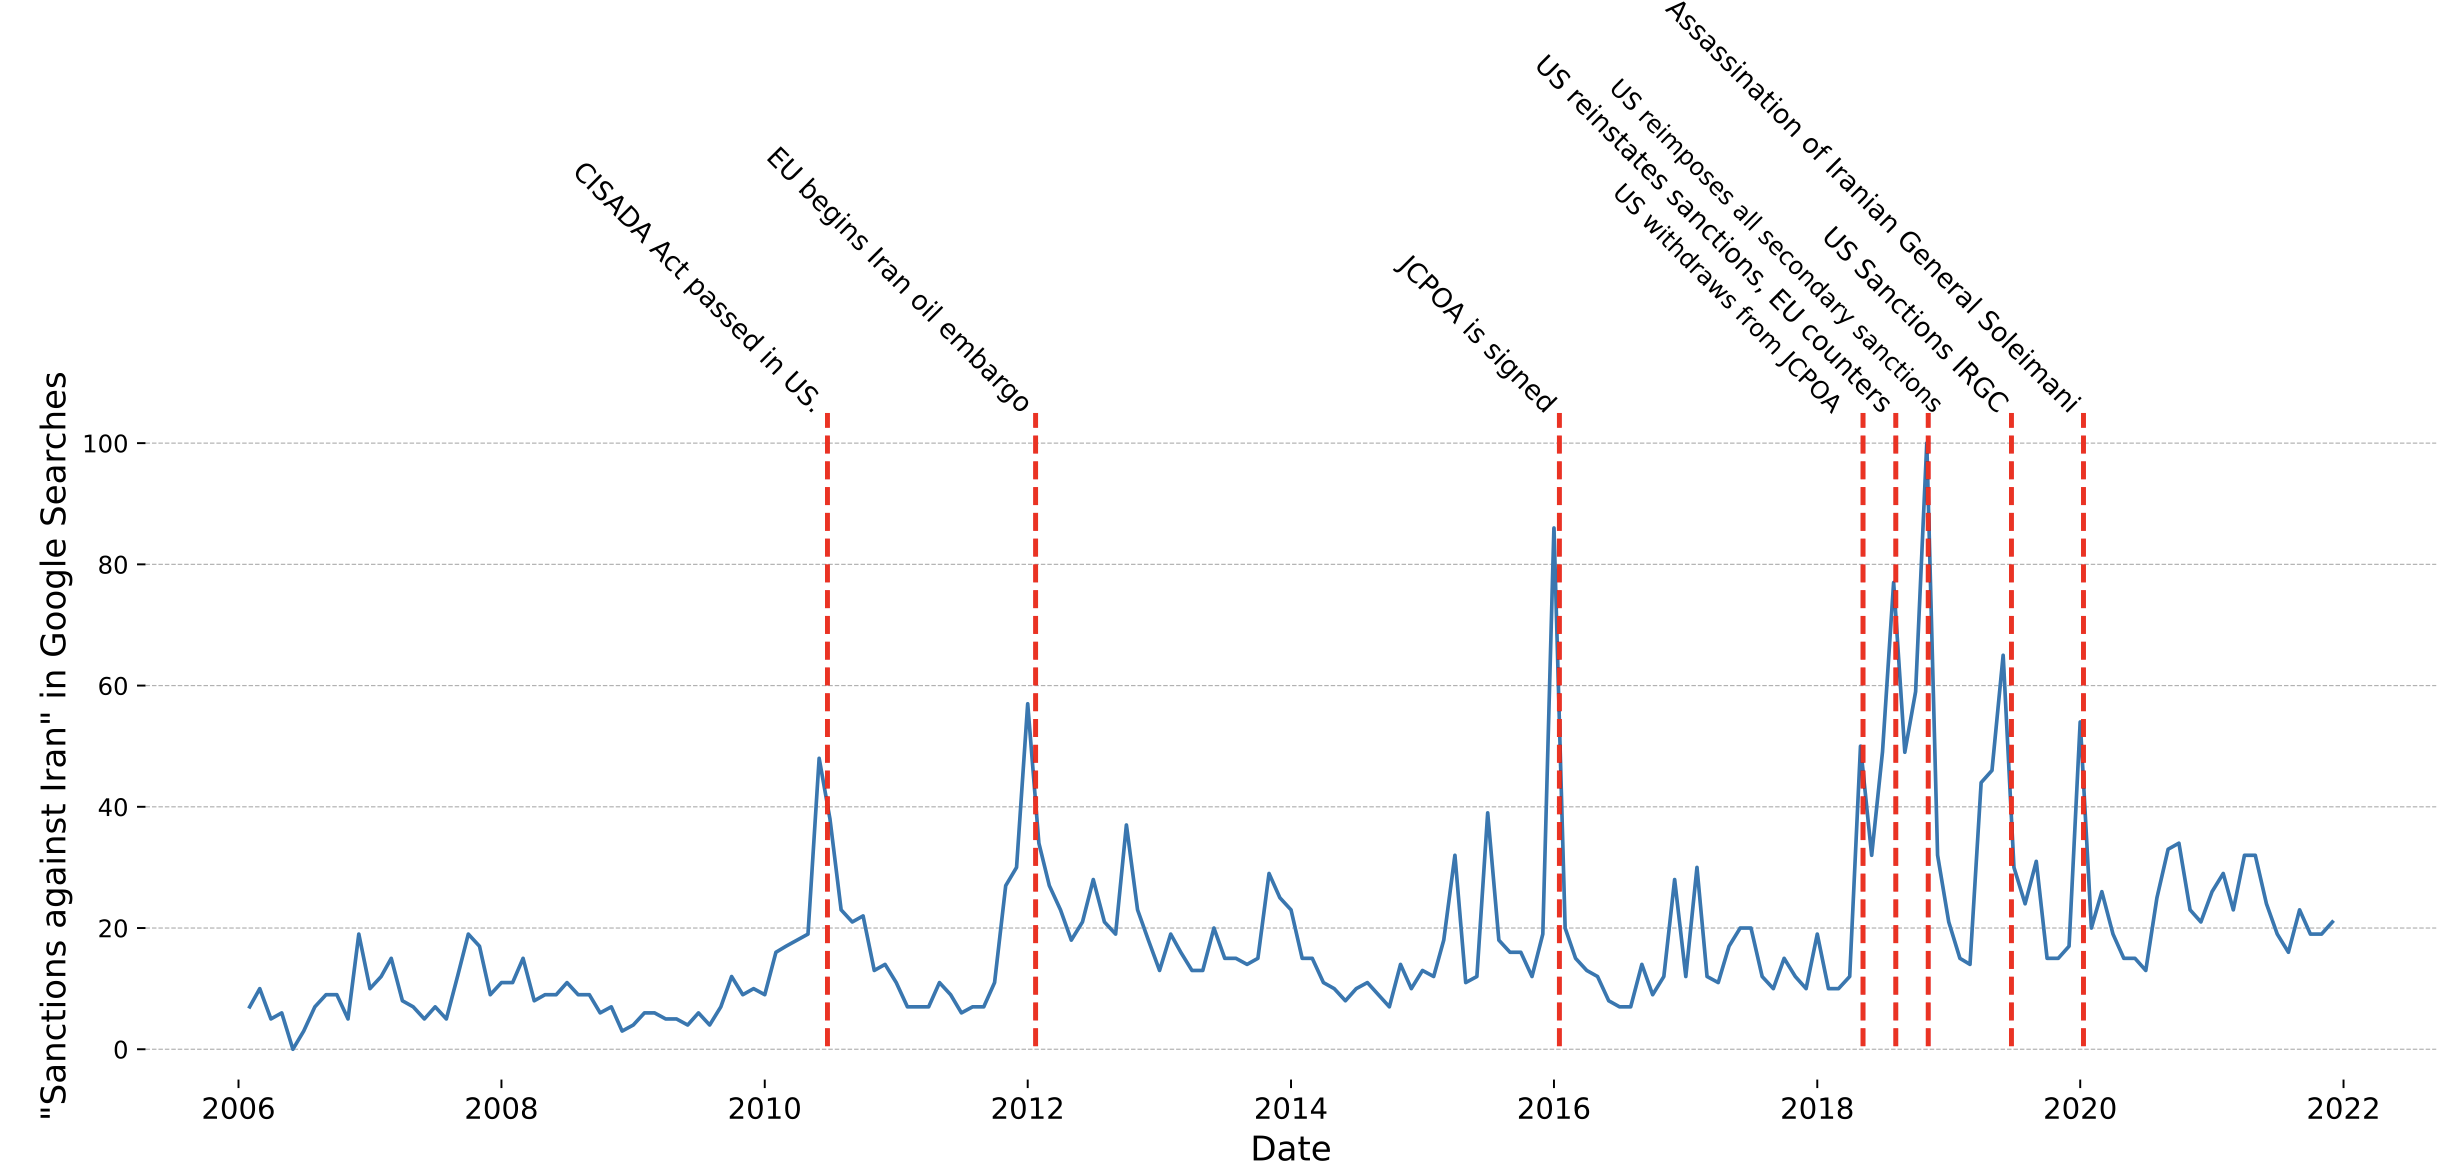 Figure 2 Timeline of Google searches for “sanctions against Iran” and key political events